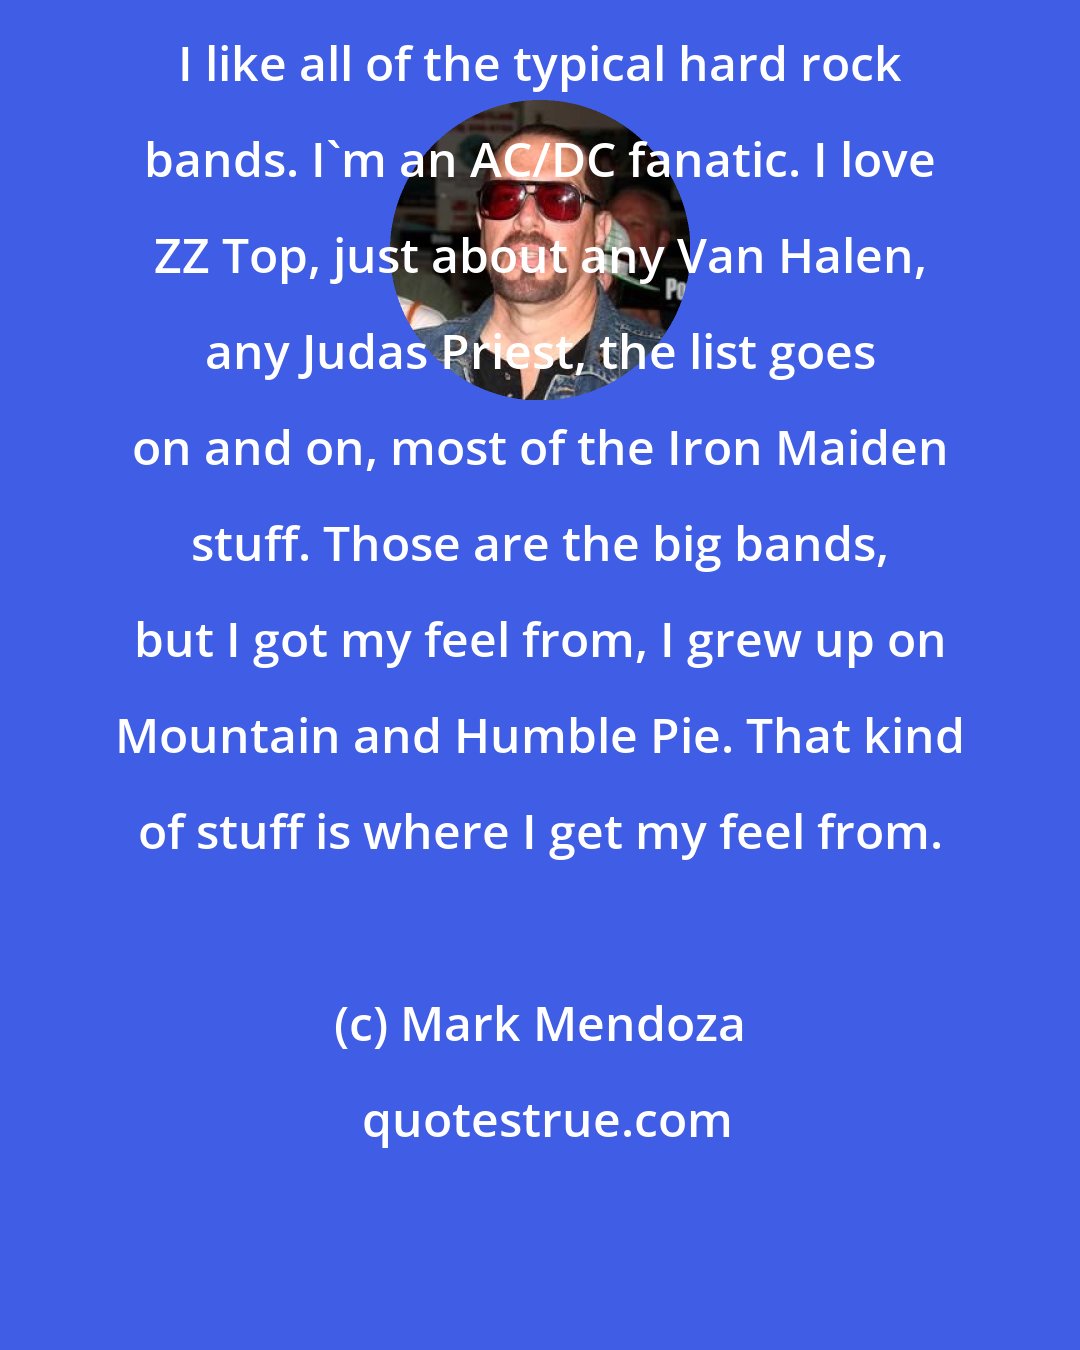 Mark Mendoza: I like all of the typical hard rock bands. I'm an AC/DC fanatic. I love ZZ Top, just about any Van Halen, any Judas Priest, the list goes on and on, most of the Iron Maiden stuff. Those are the big bands, but I got my feel from, I grew up on Mountain and Humble Pie. That kind of stuff is where I get my feel from.